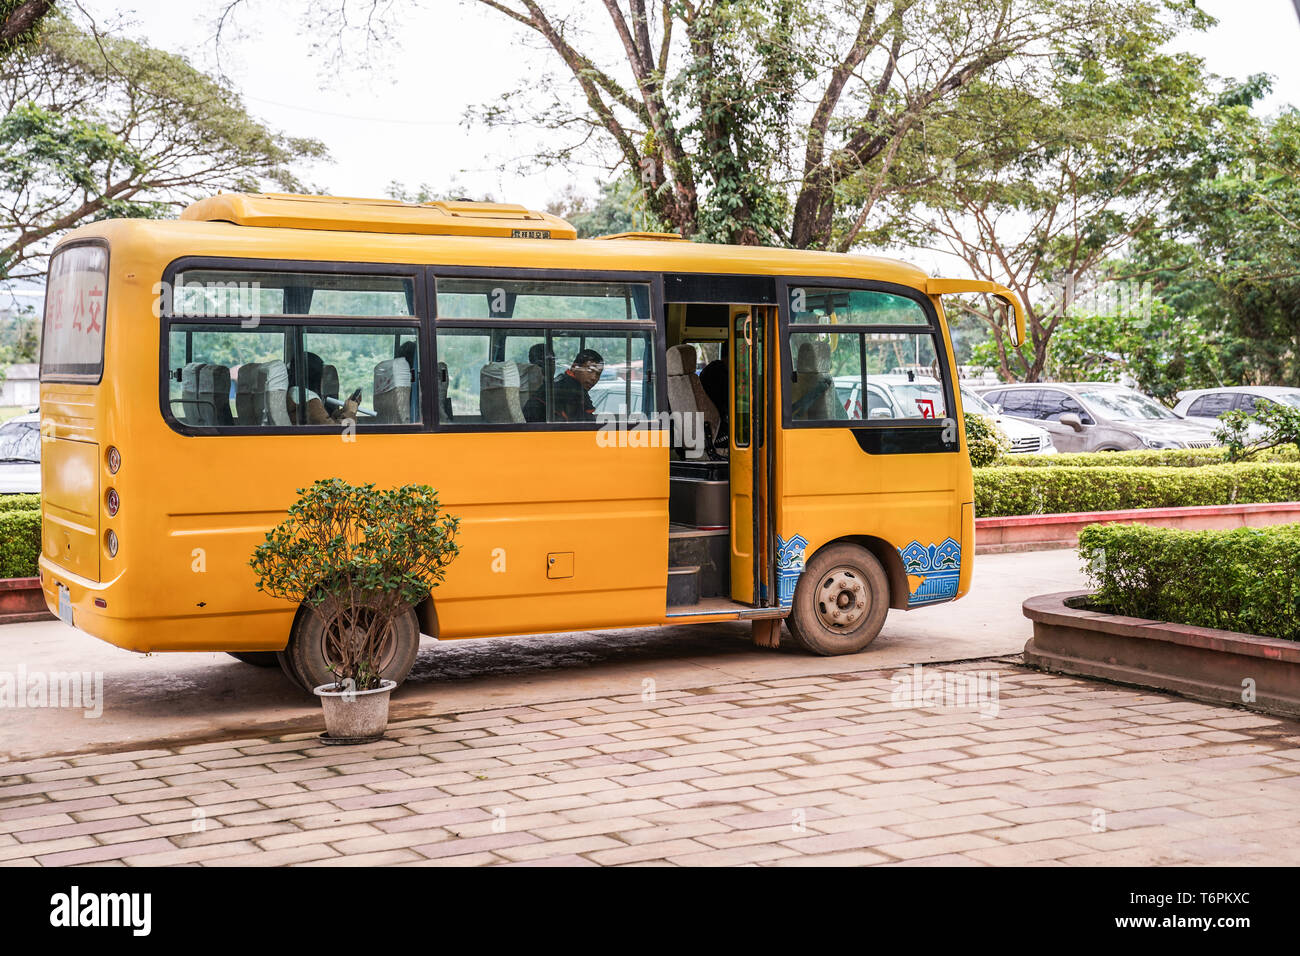 Ton Pheung district, Laos - 13 January 2018, Yellow Laos bus waiting for passengers at Golden triangle special economic zone. Stock Photo